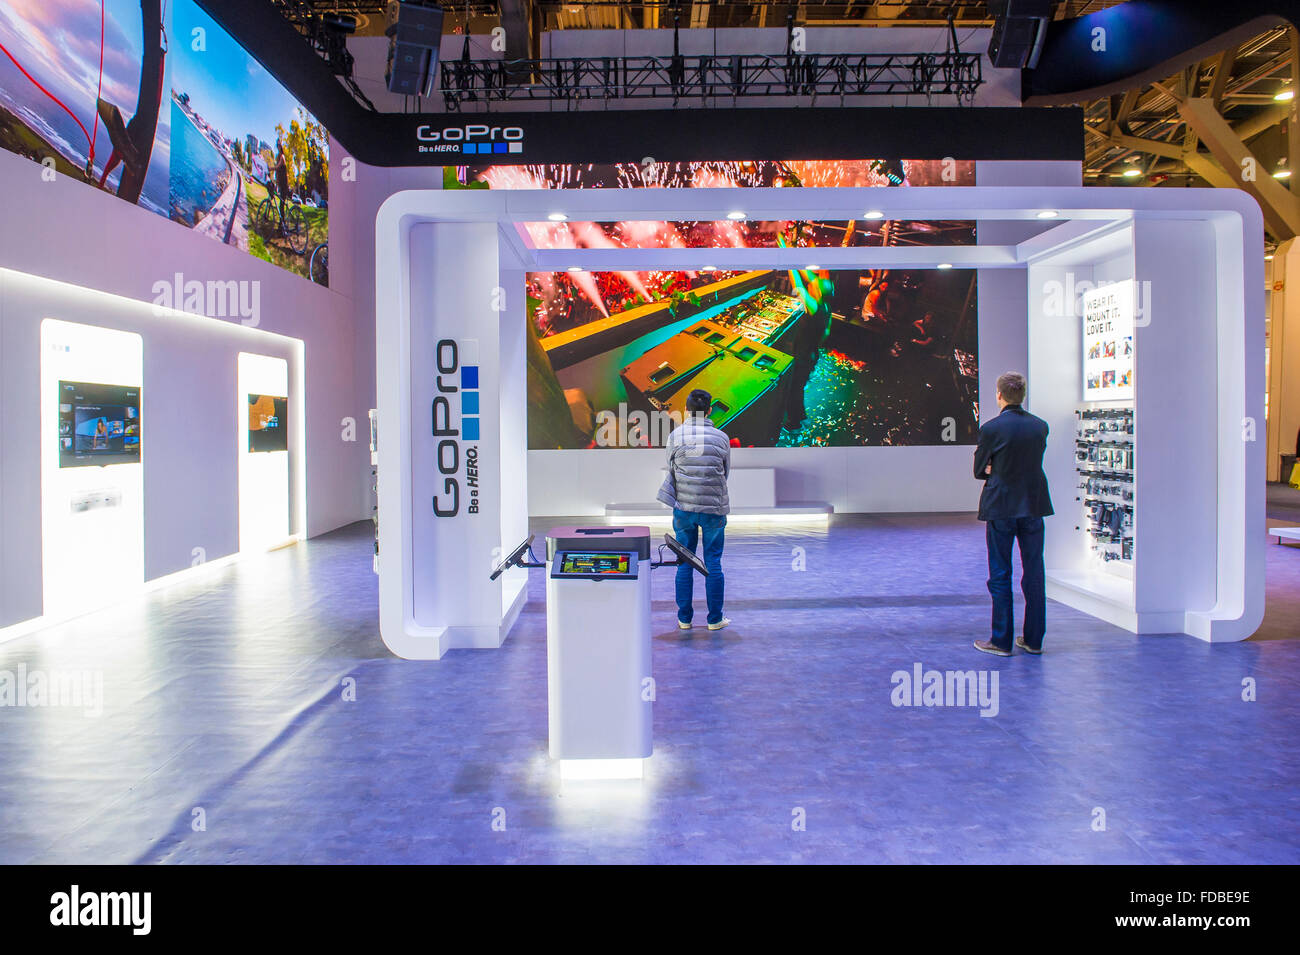 The GoPro booth at the CES show held in Las Vegas Stock Photo - Alamy